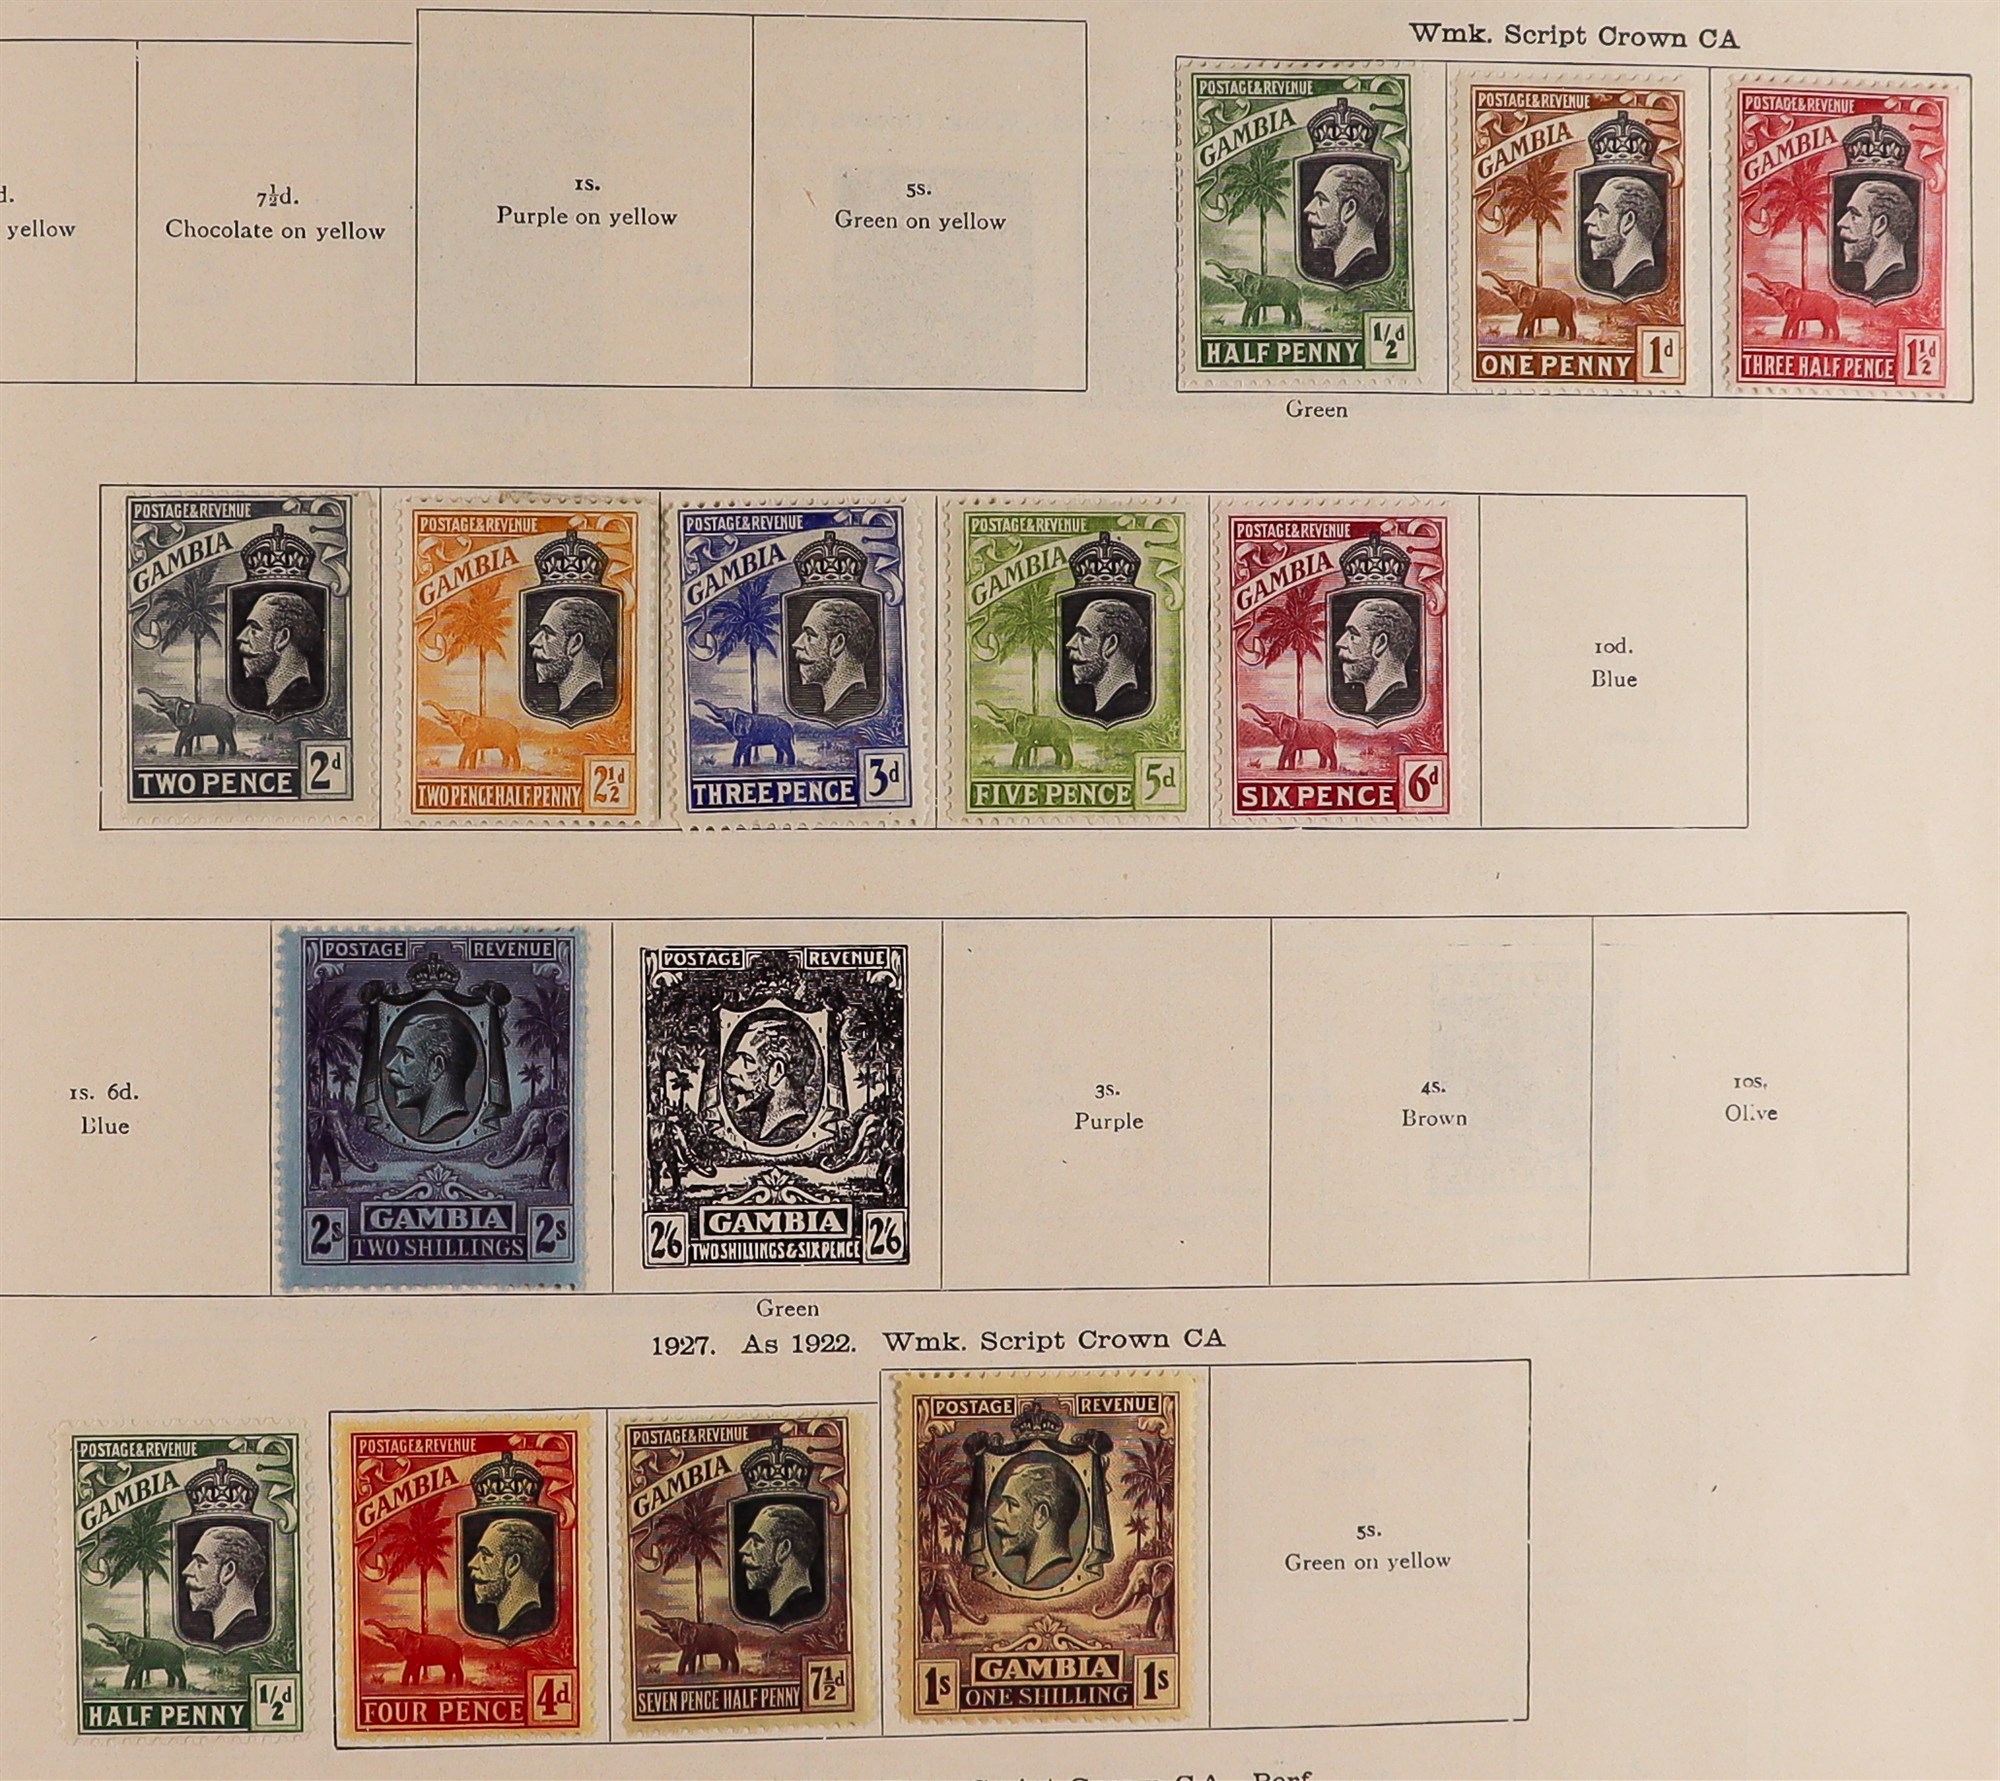 COLLECTIONS & ACCUMULATIONS BR. EMPIRE IN SG "IDEAL" ALBUM. Volume 1 for Br. Empire stamps to mid- - Image 9 of 10